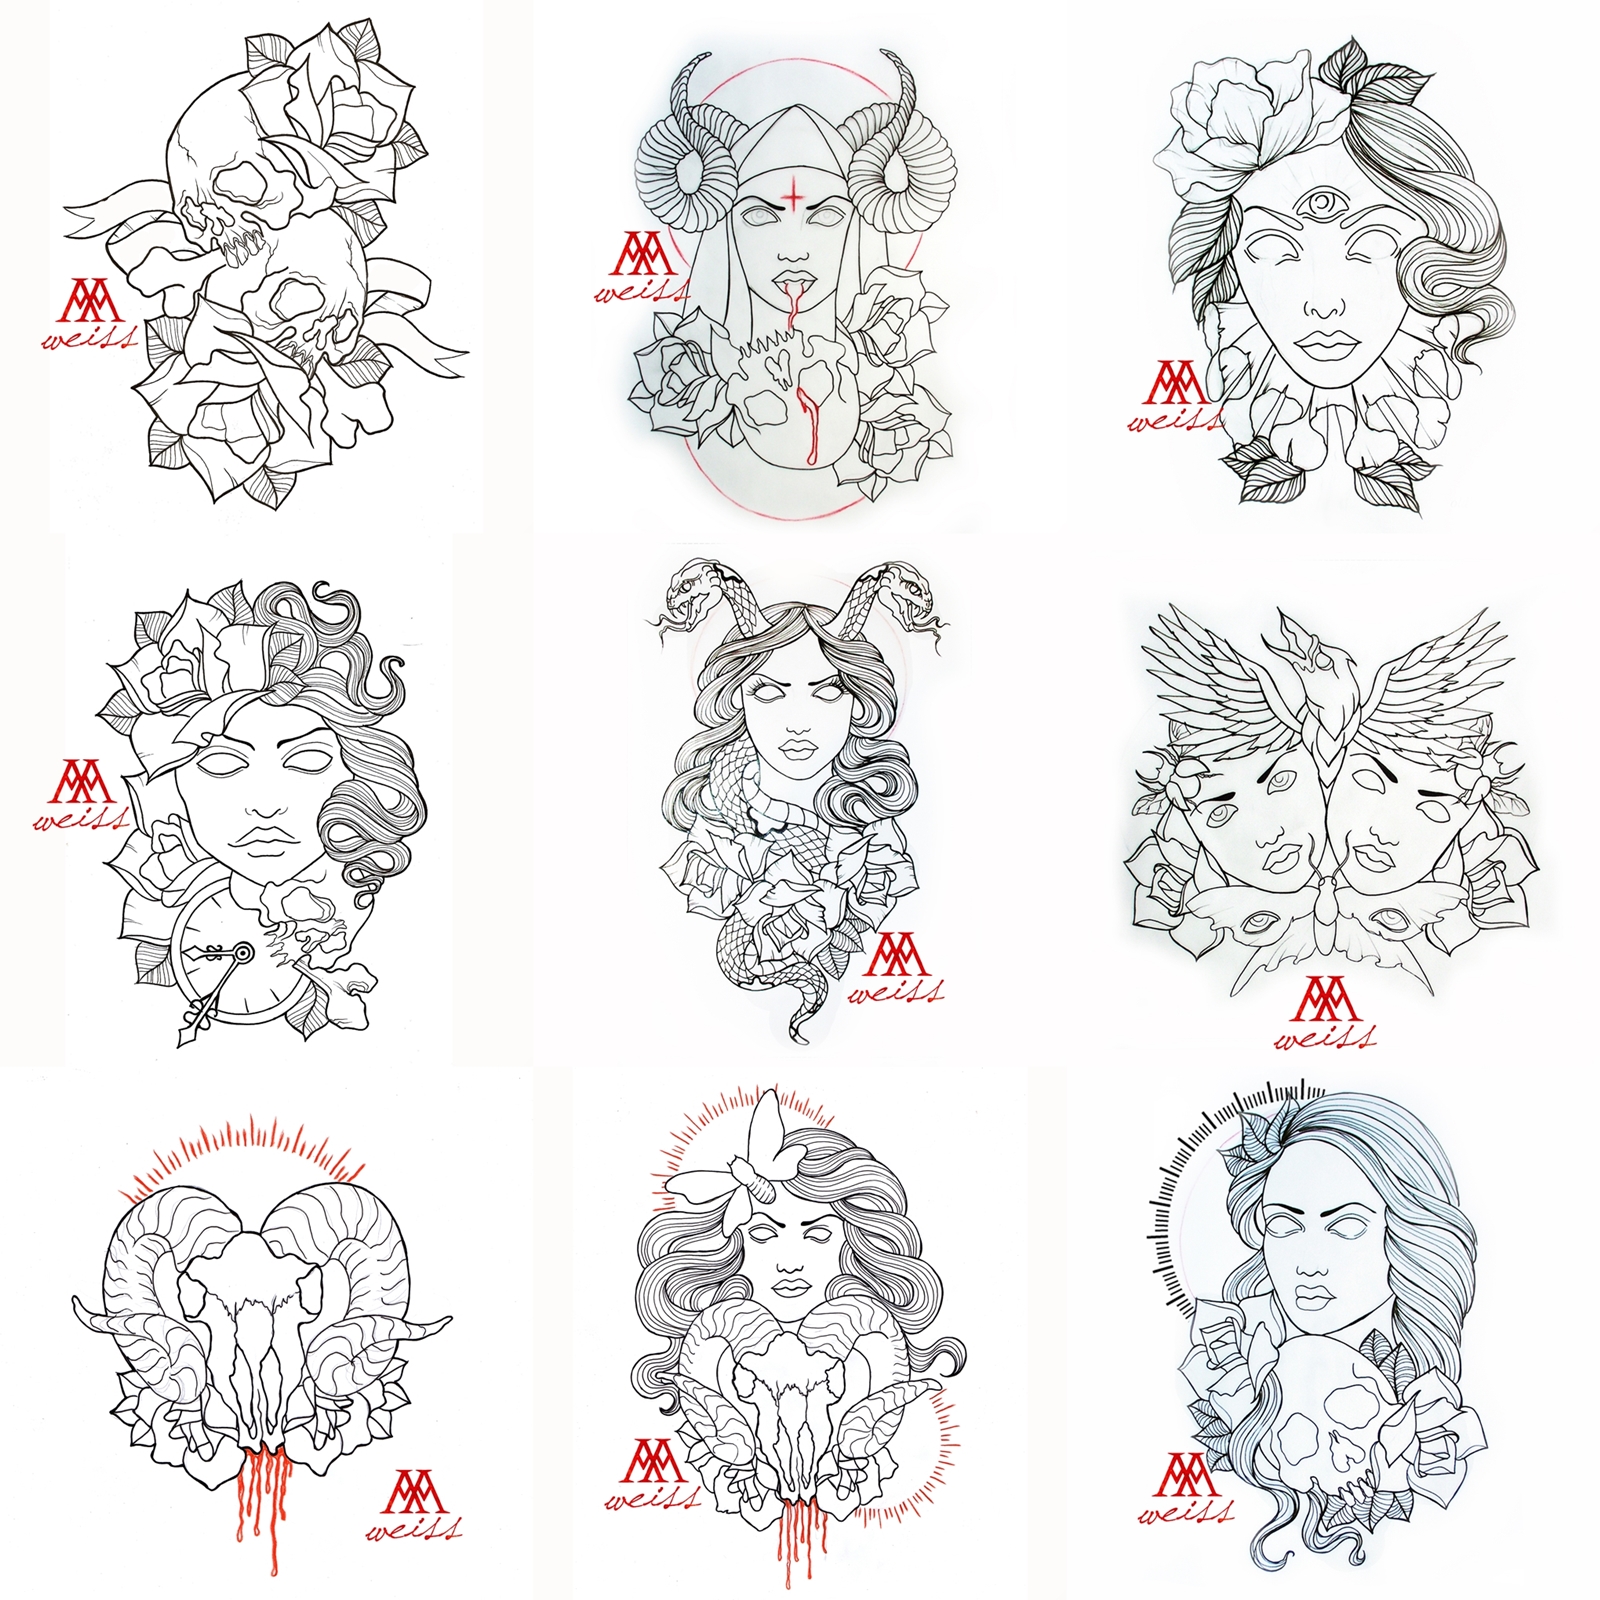 Tattoo Outlines 9 Pcs Pack Part 1 Free Download By Mweiss Art On Deviantart